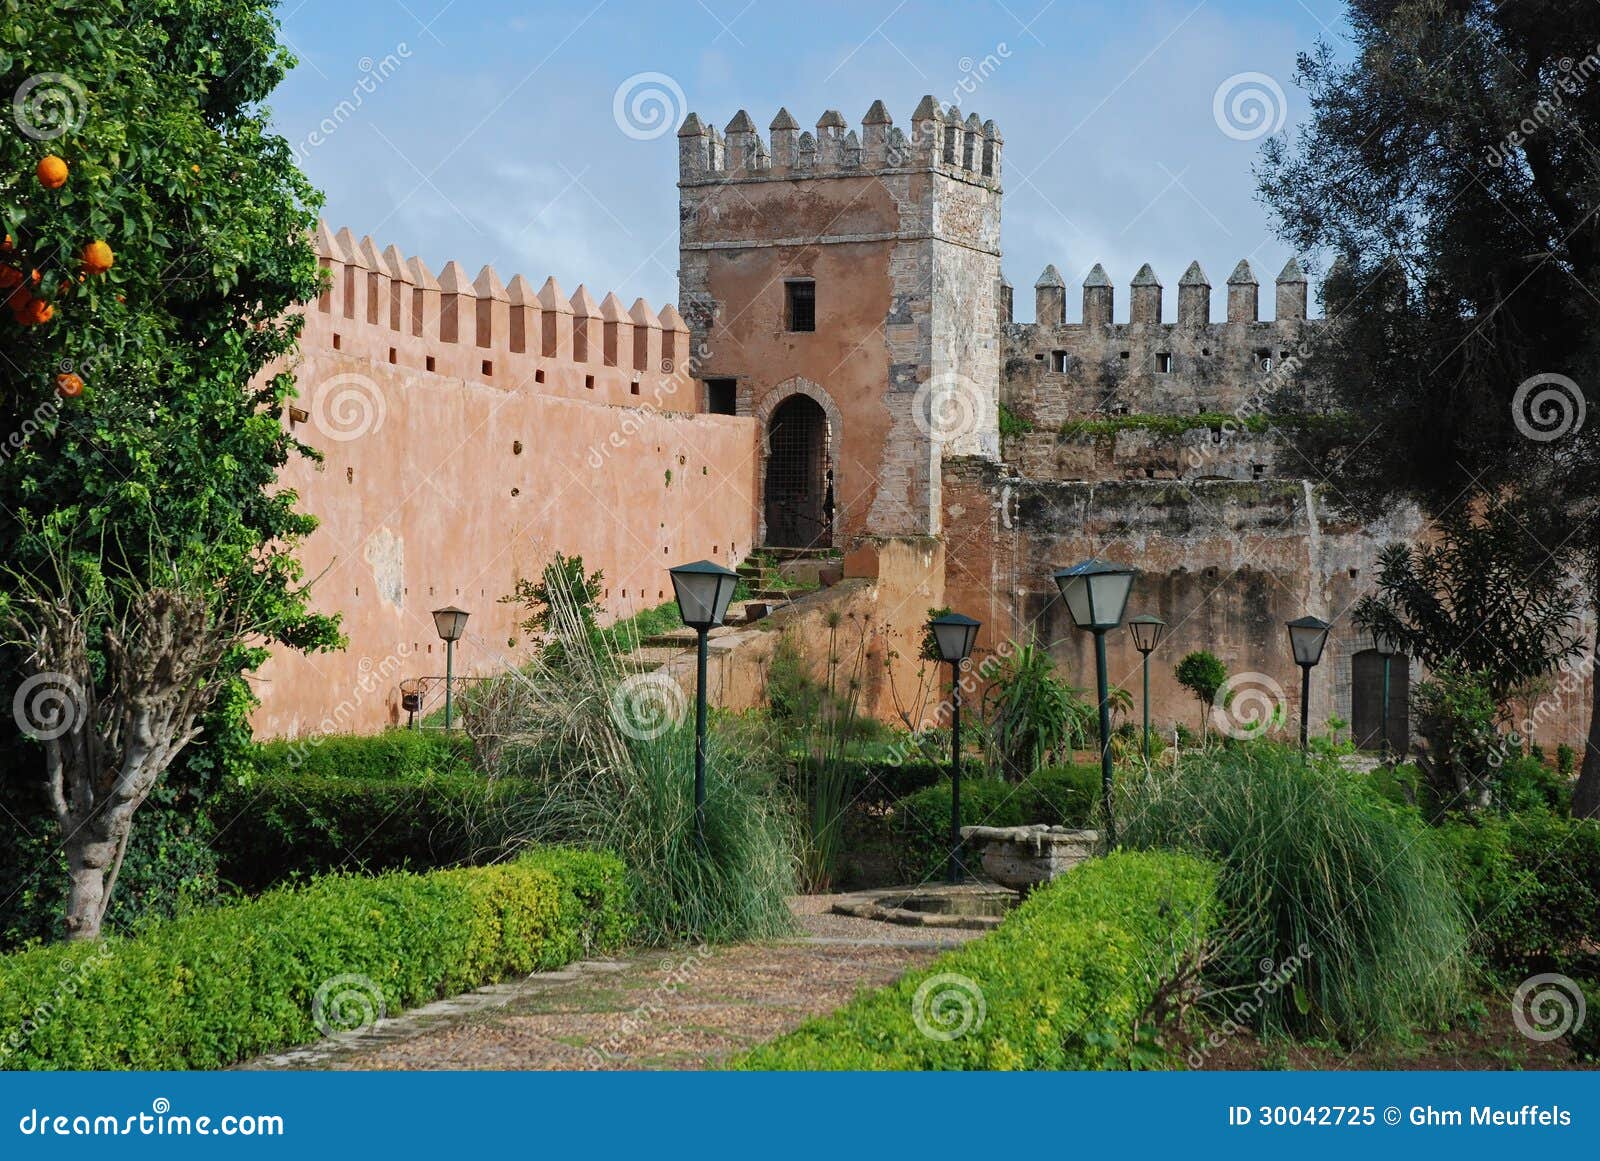 andalusian garden located in the ouida kasbah - rabat- morocco